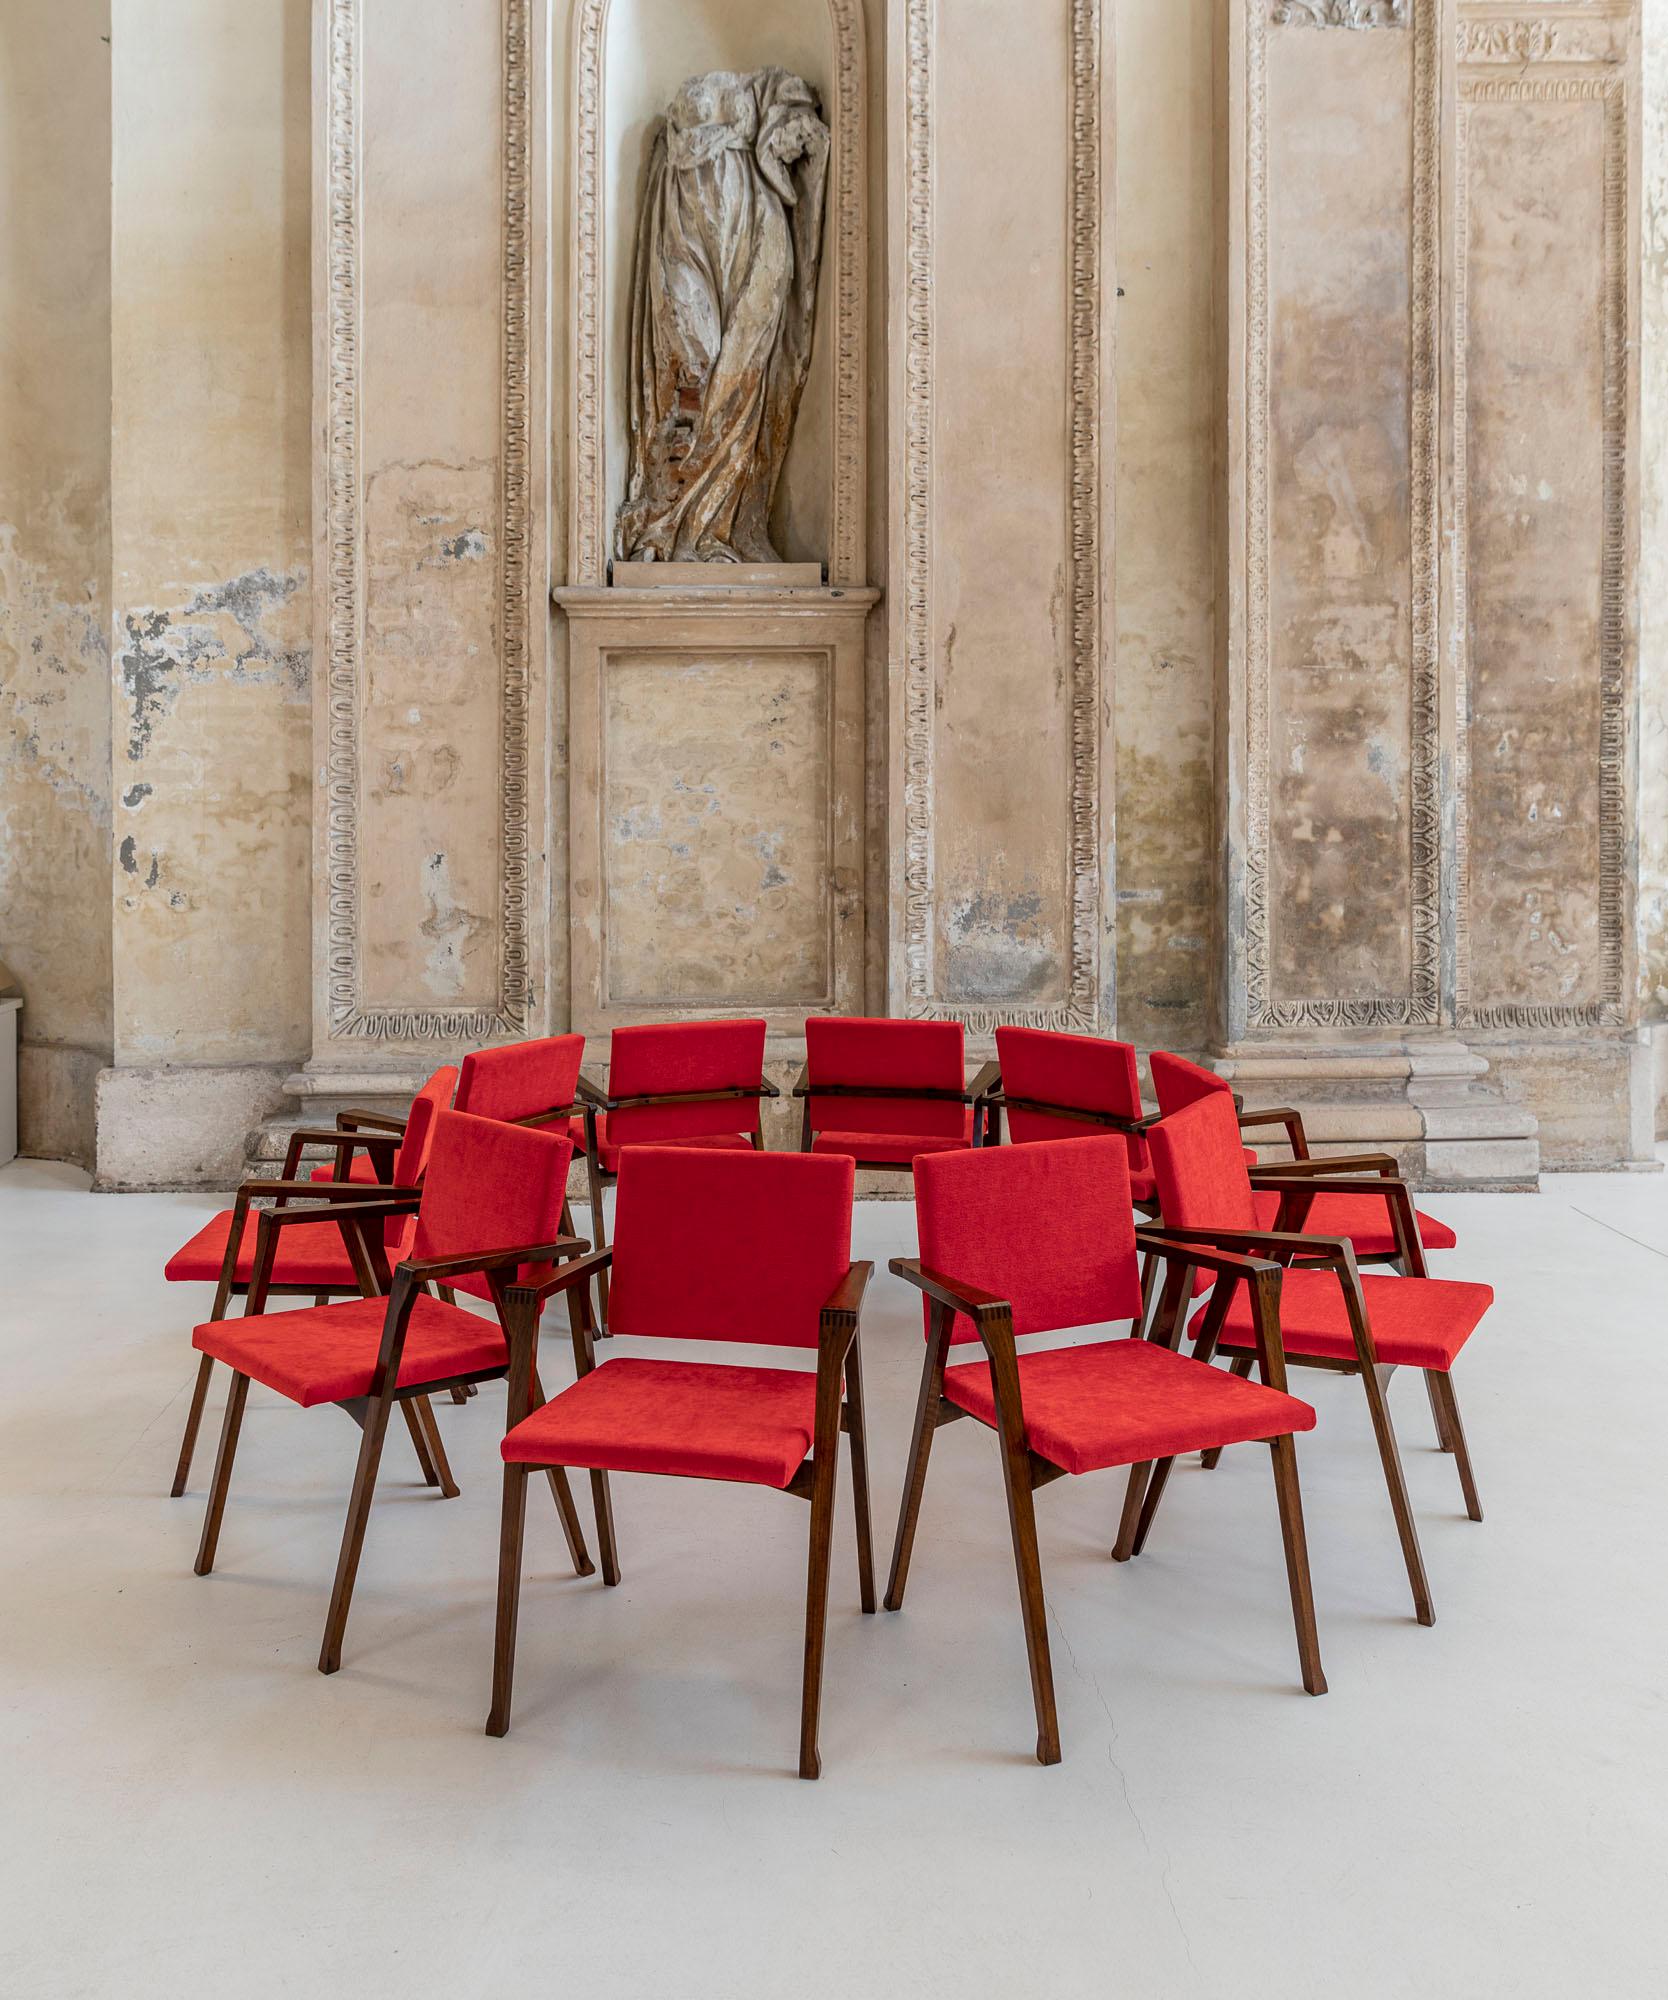 Extraordinary set of 10 chairs Luisa, designed by Franco Albini in 1955.
Newly reupholstered in red fabric.